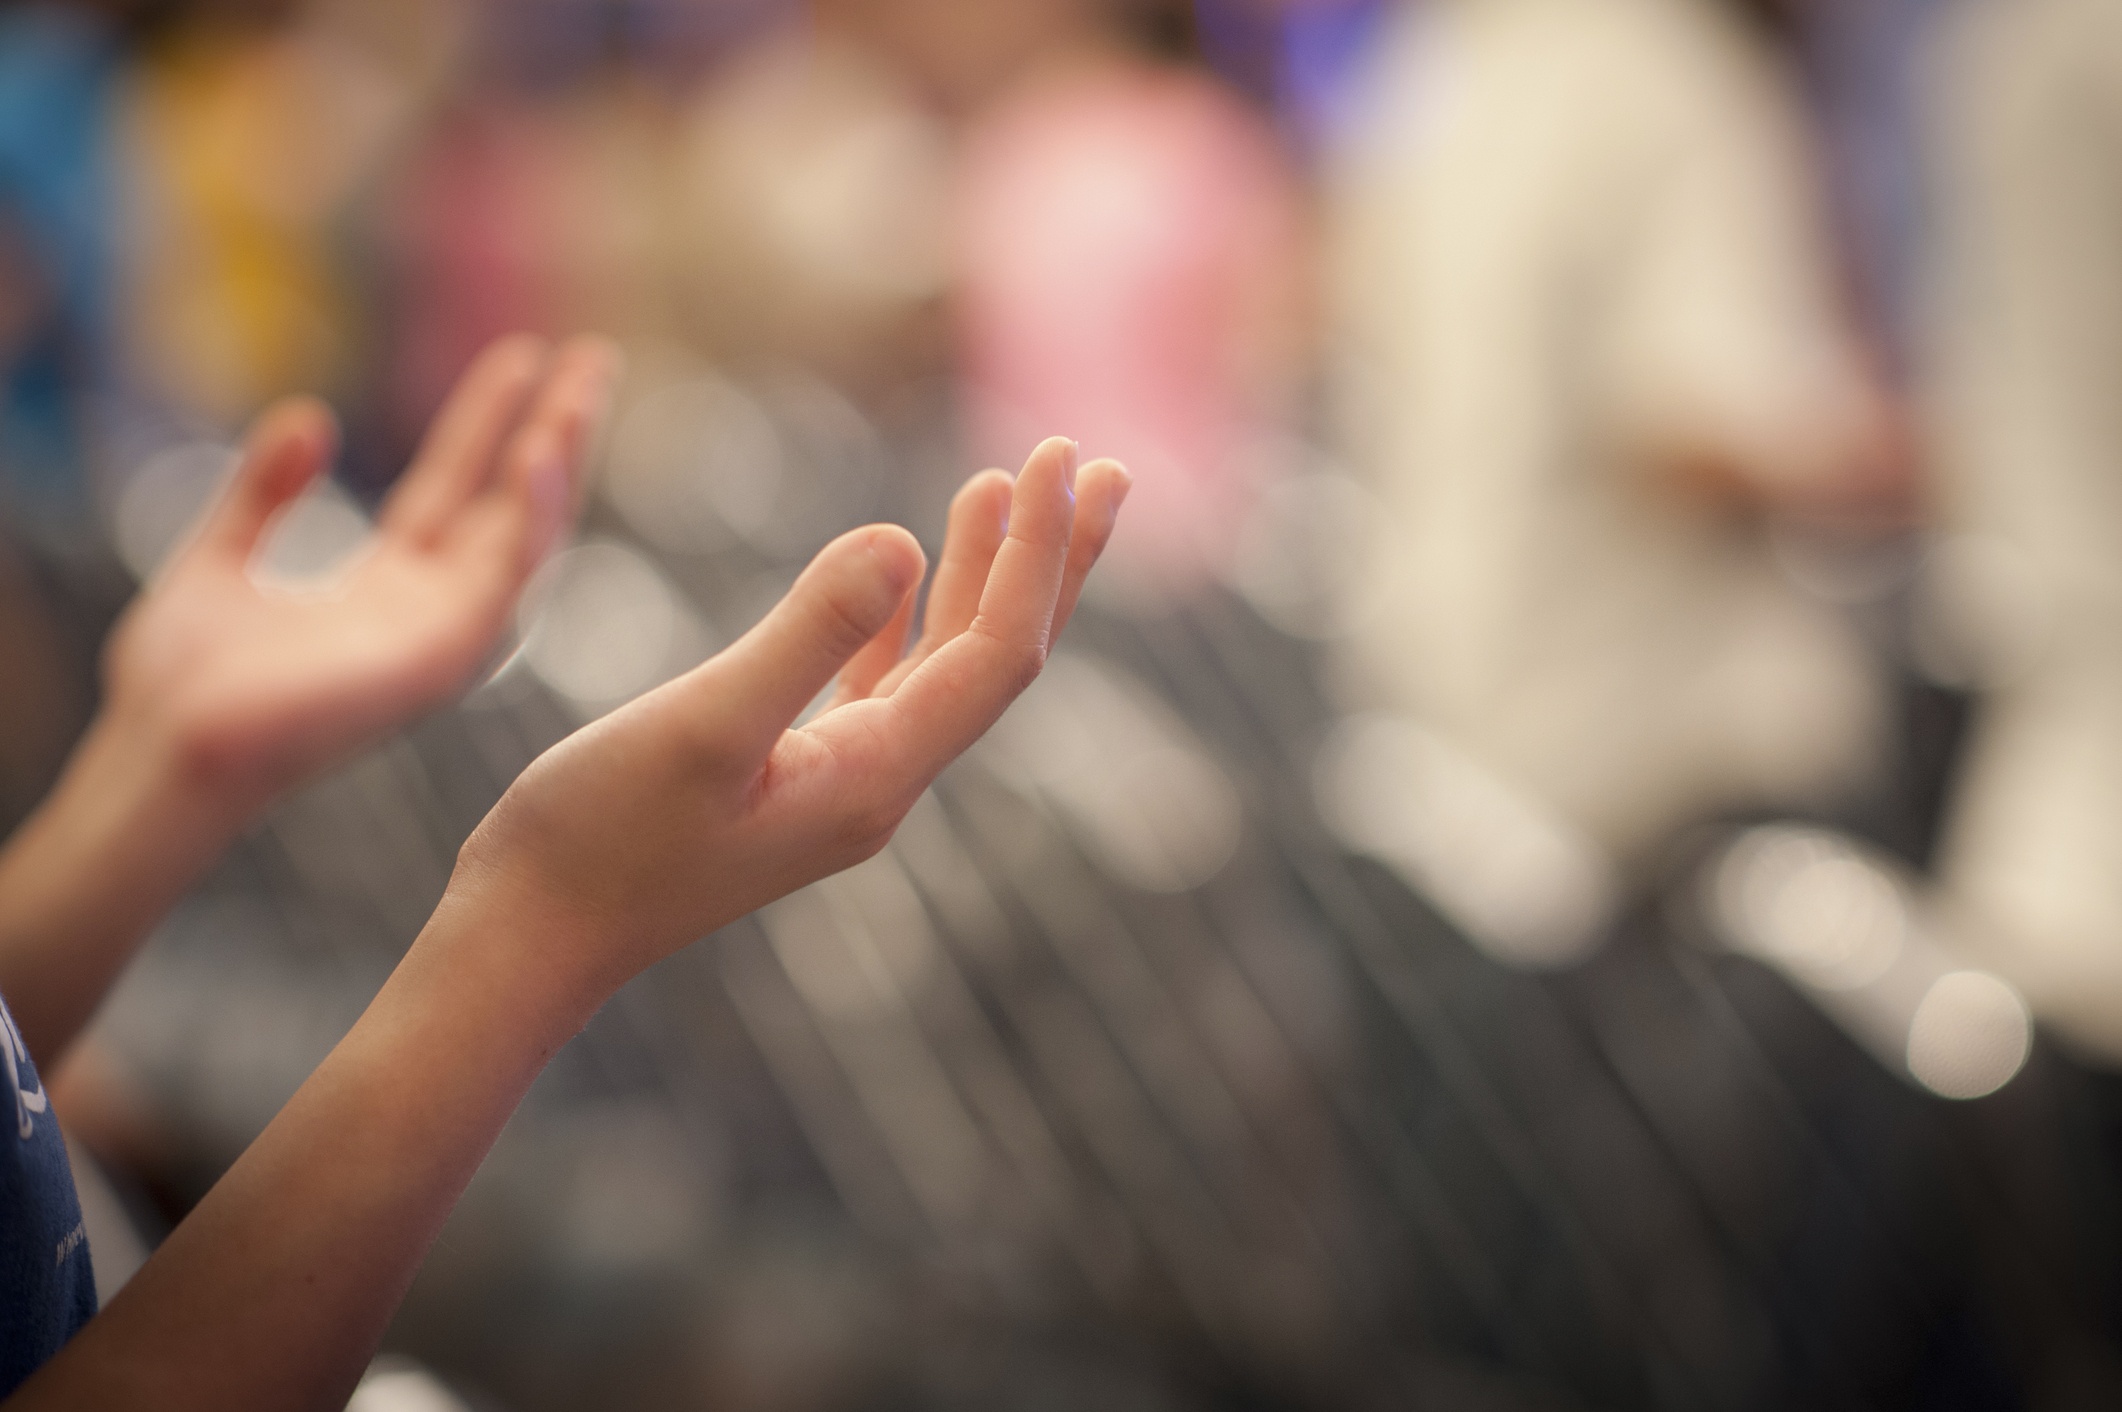 a person's hands lifted in prayer and worship - background is blurry